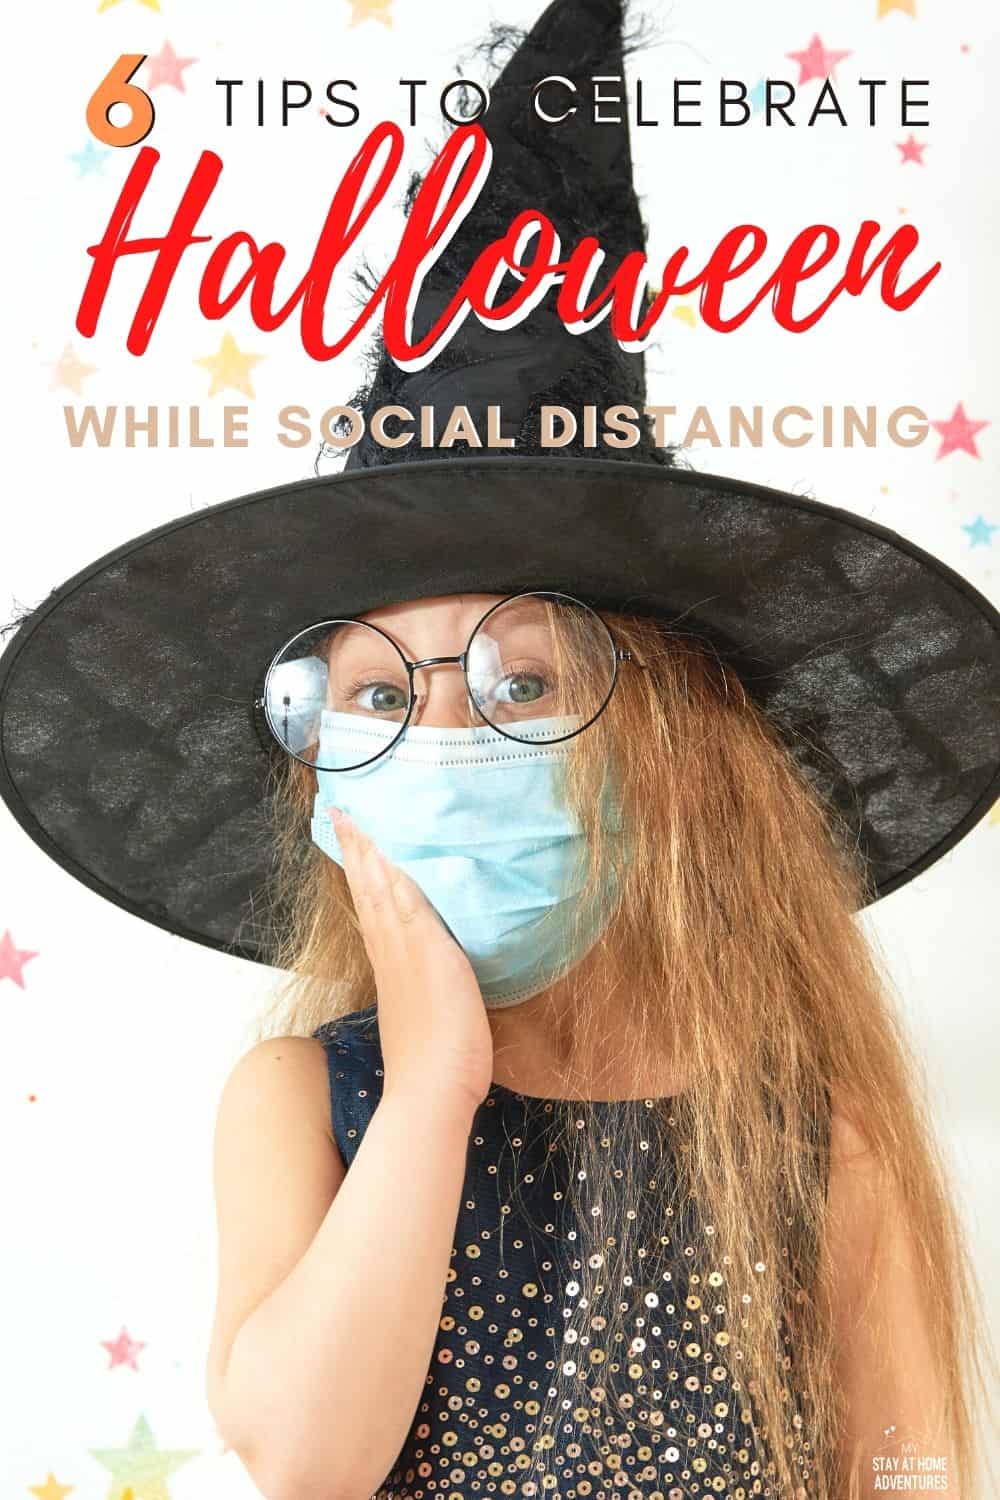 Halloween 2020 is not going to be the same, but that doesn't mean you can't enjoy it and make it memorable with these tips to celebrating Halloween while social distancing. #halloween #howto #tips #safehalloween via @mystayathome